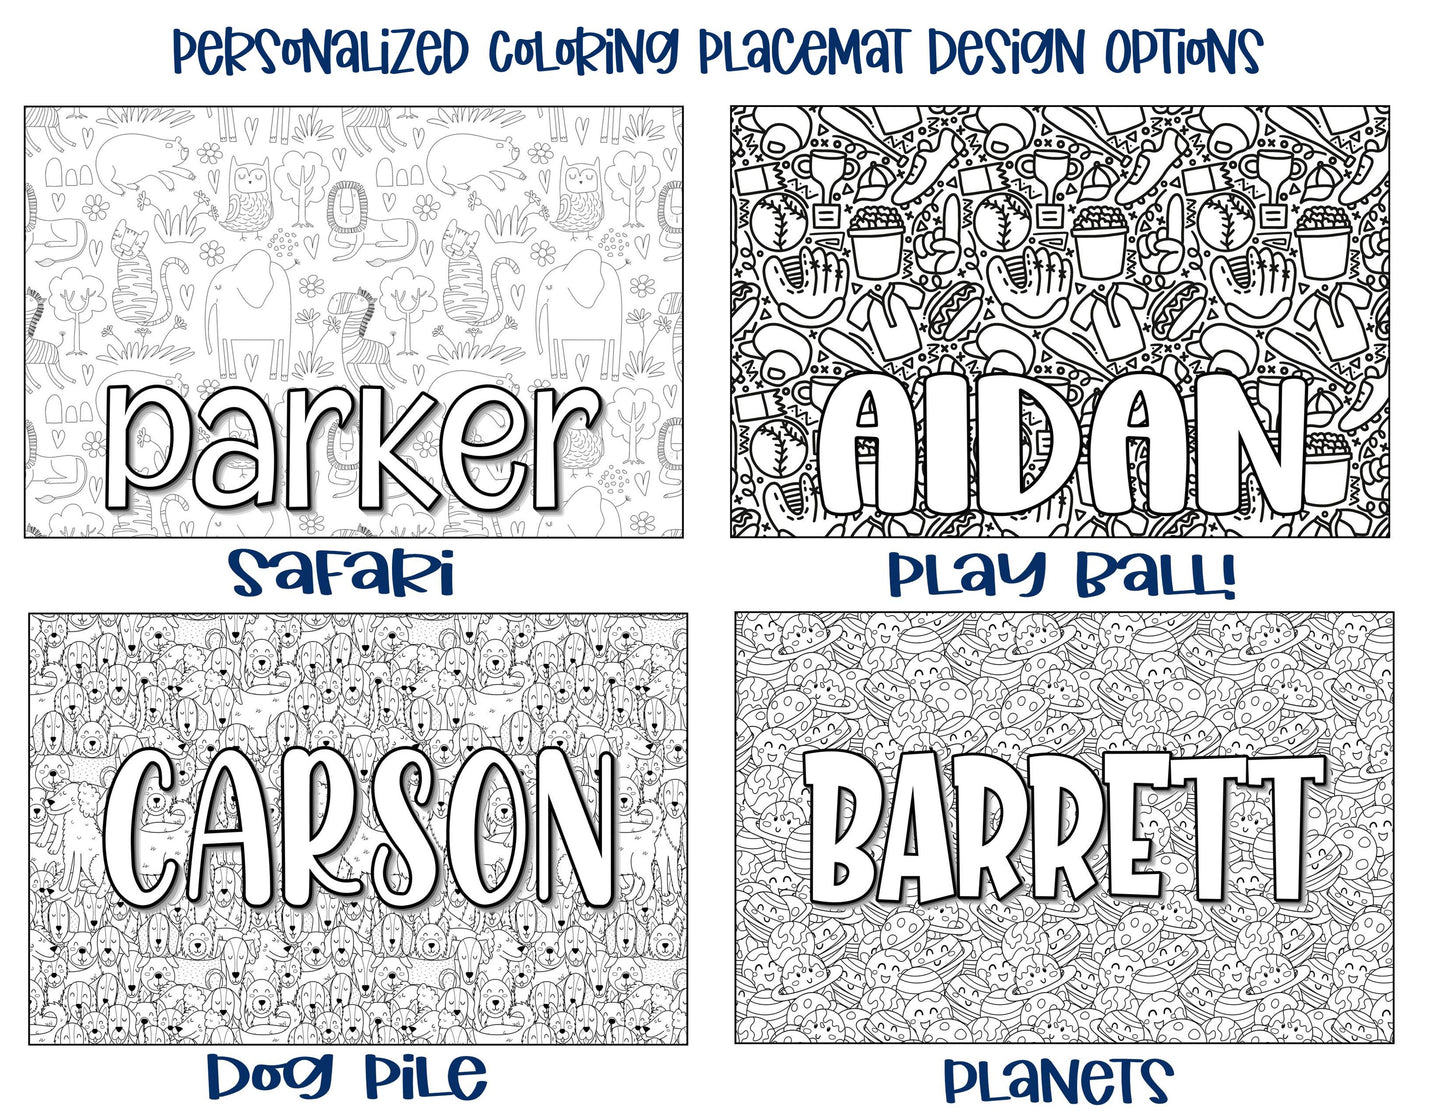 Personalized Coloring Name Placemat - Take Off Space Design